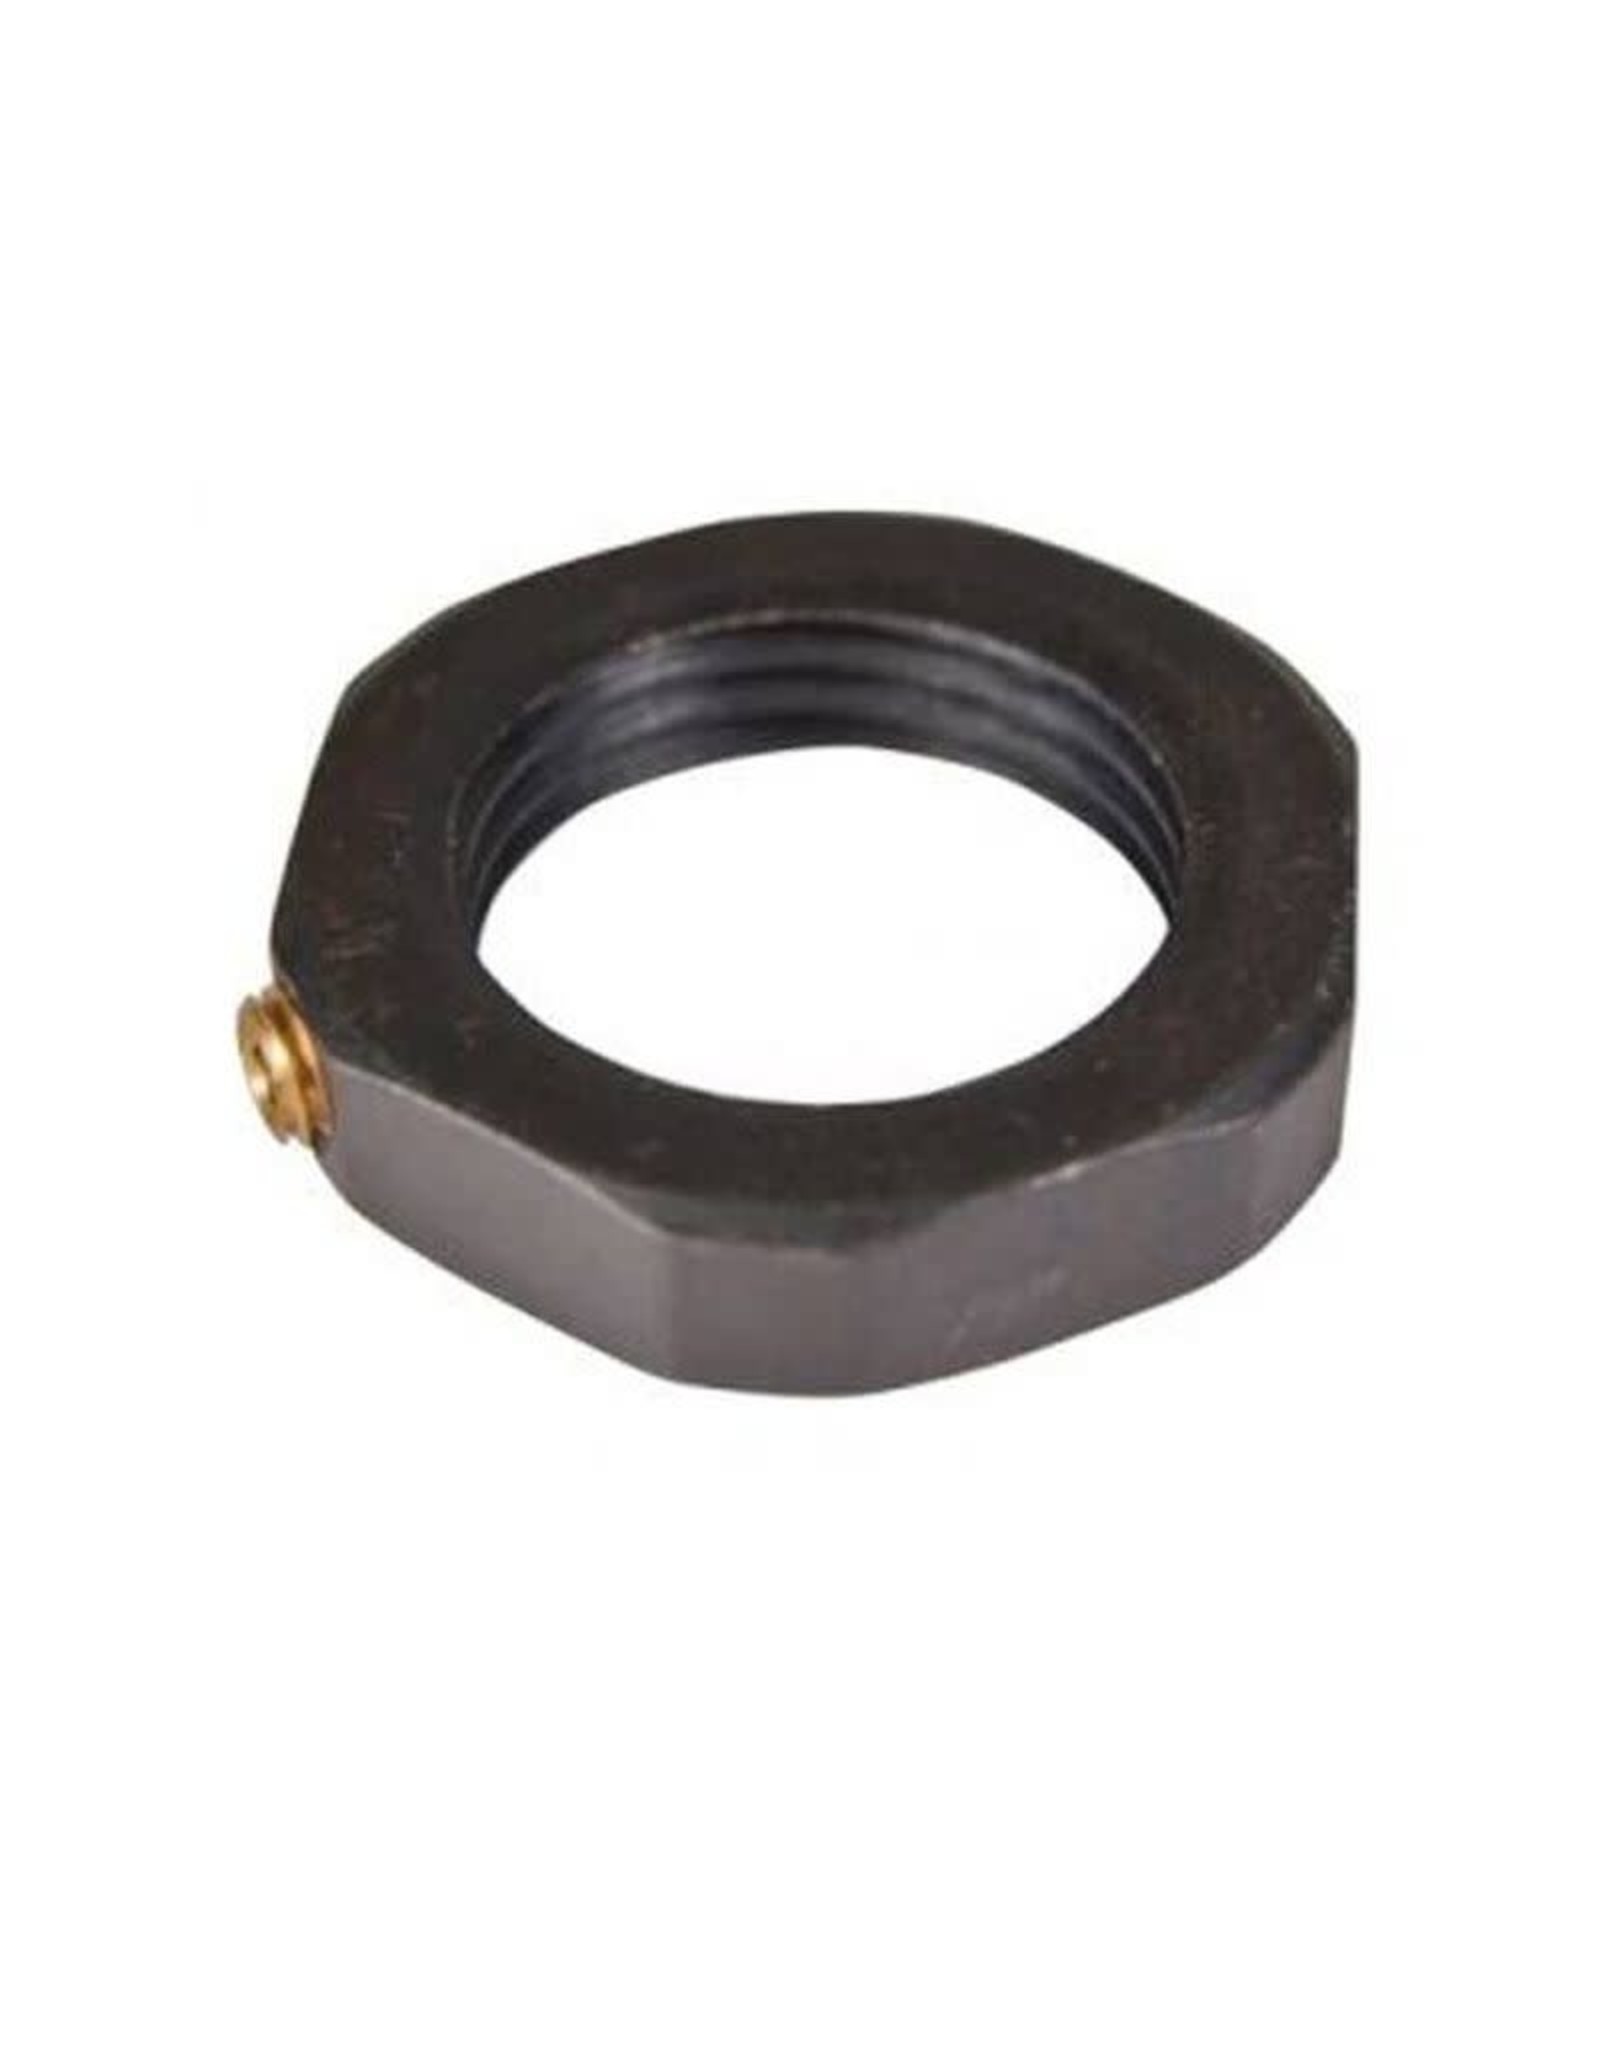 RCBS RCBS Die Lock Ring Assembly